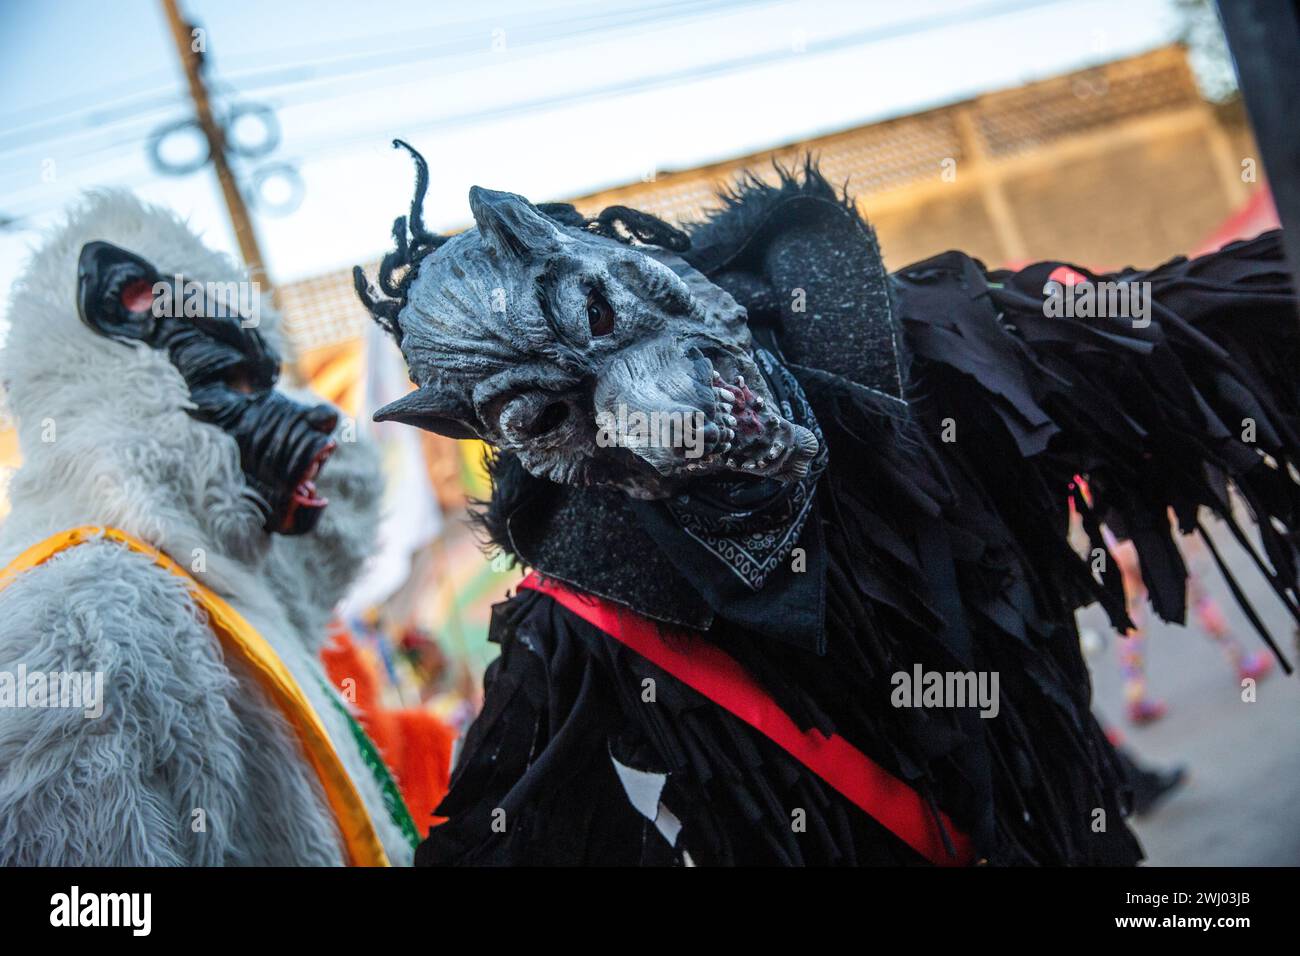 People dressed as wolves take part during the carnival The Barranquilla Carnival is one of the most important folkloric festivals in Colombia, also one of the best-known carnivals in Latin America and an intangible cultural heritage of humanity proclaimed by UNESCO in 2003. It is a set of cultures, native, African and Spanish that is reflected in the dances, the masks, the floats, the dresses and the music. It attracts tourists from all over the world and international media attention. (Photo by Antonio Cascio/SOPA Images/Sipa USA) Stock Photo